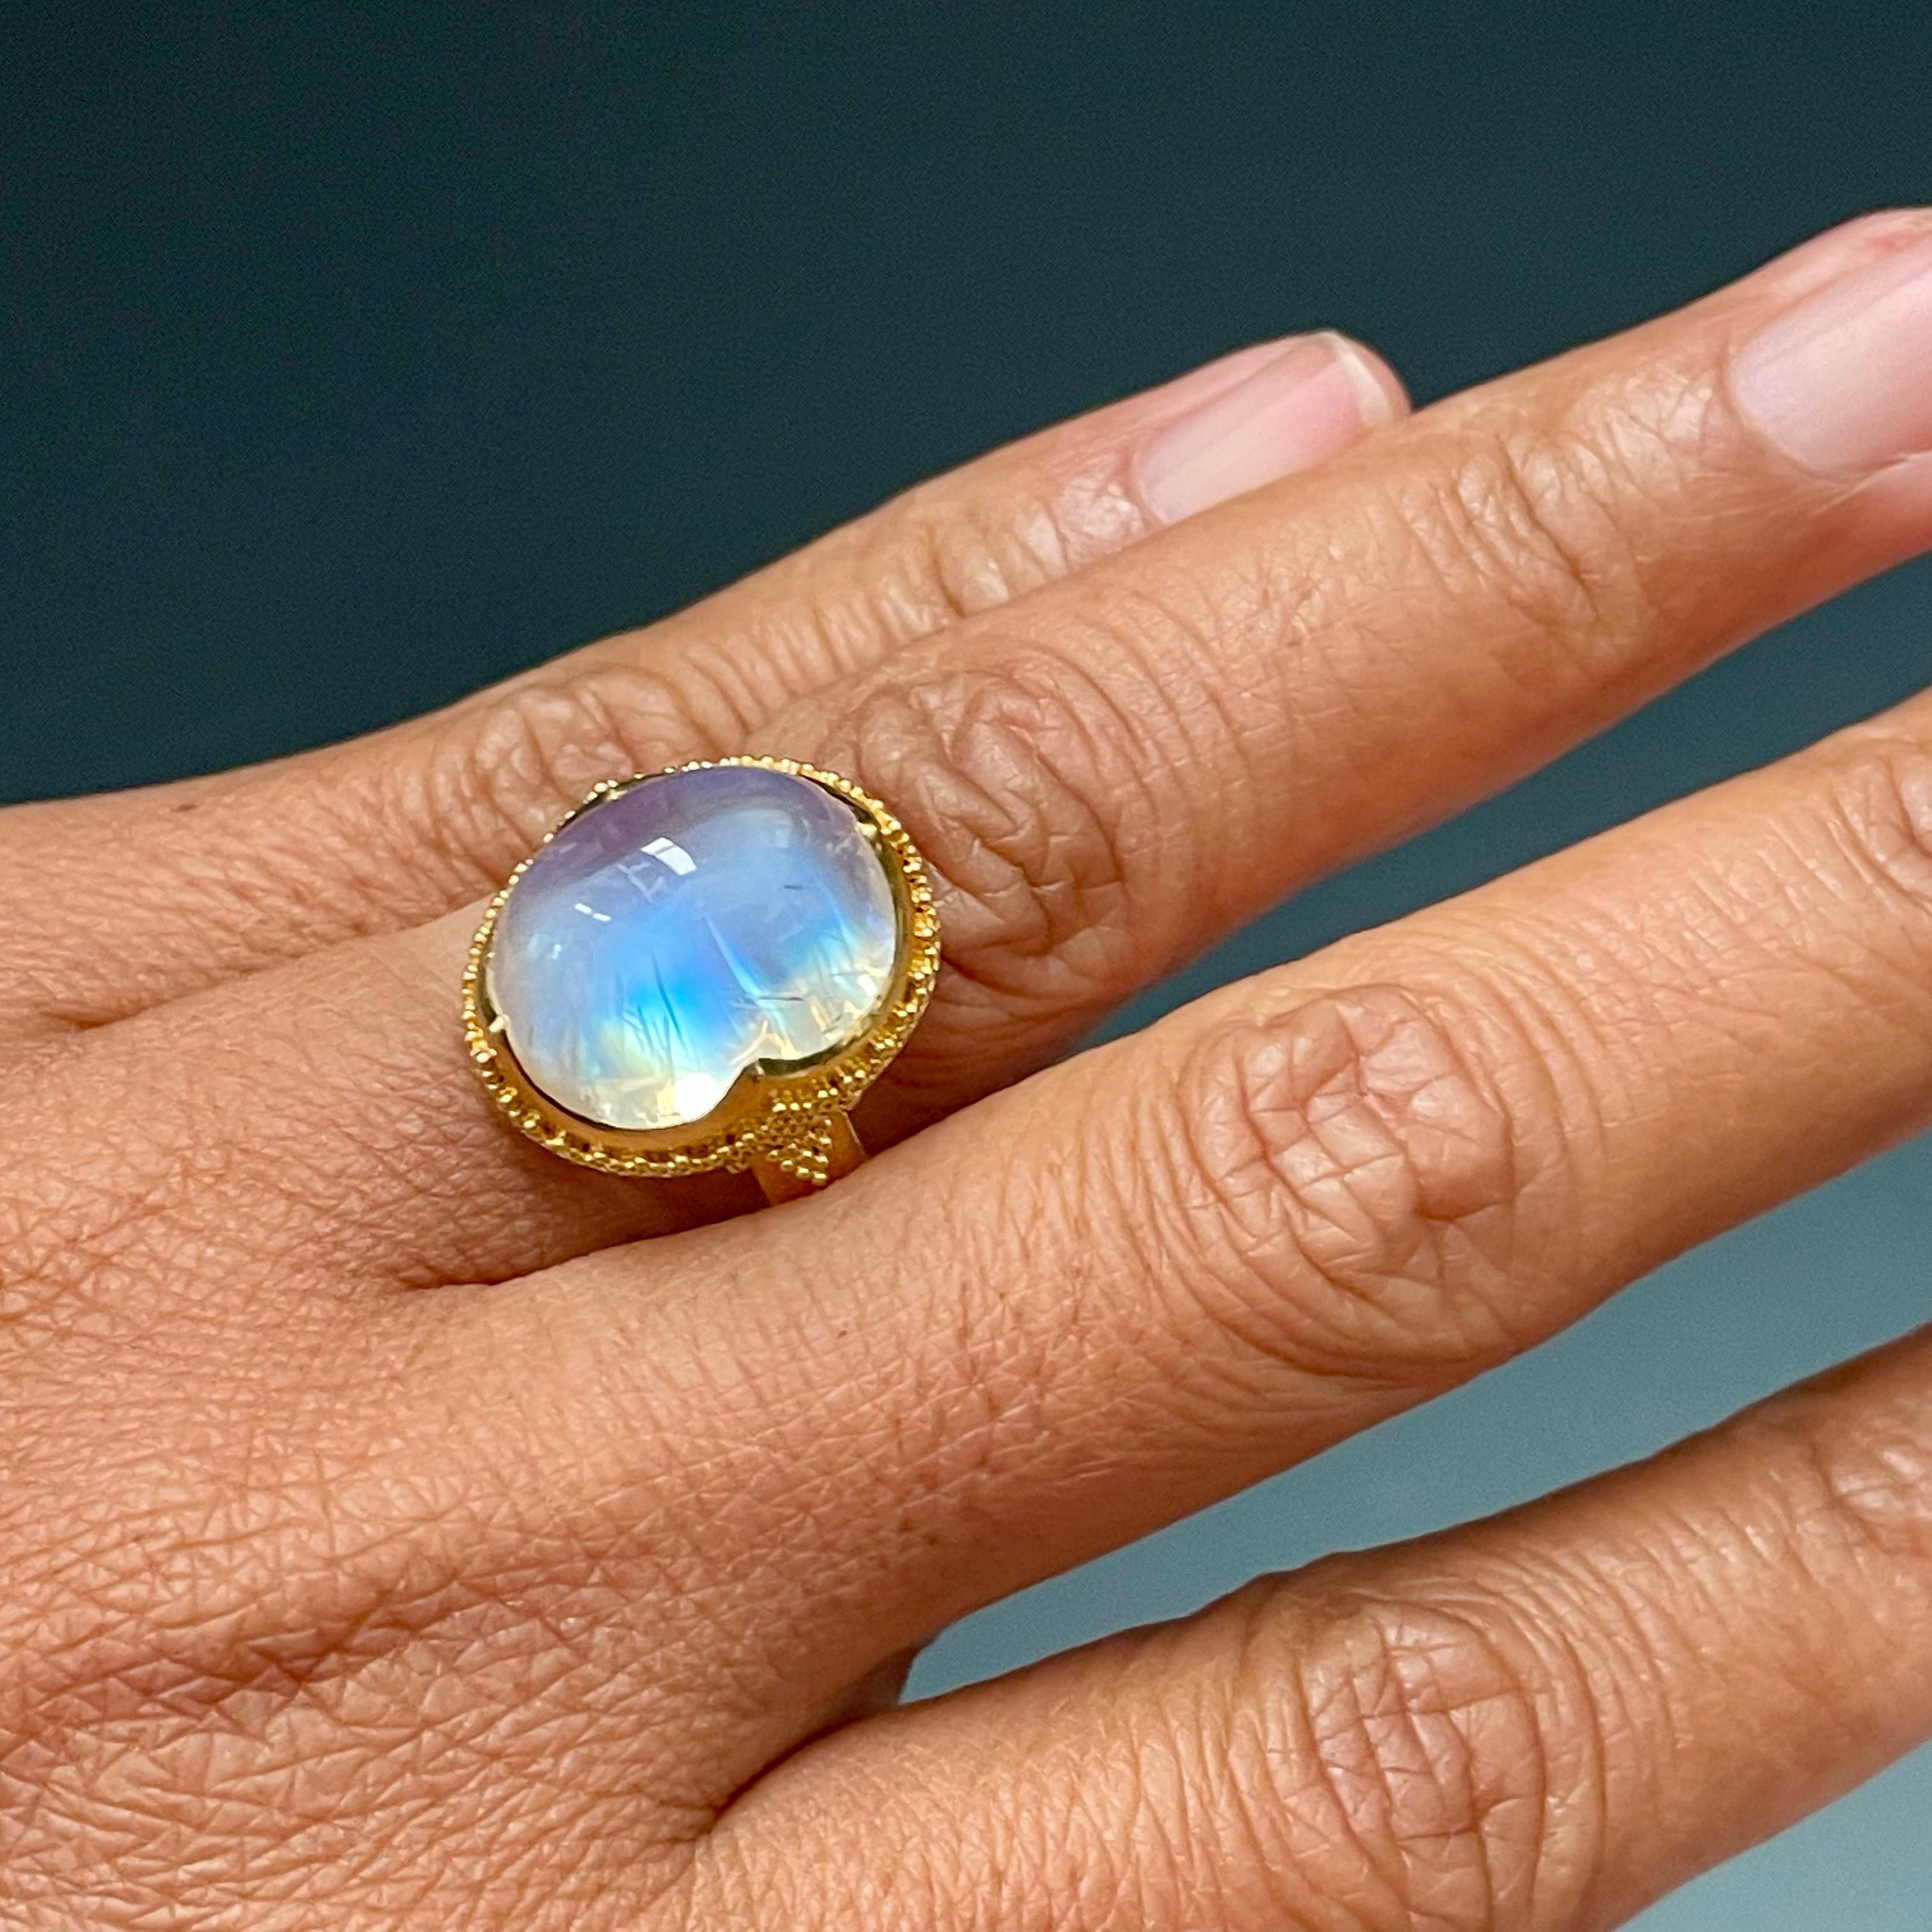 Steven Battelle 18.6 Carat Rainbow Moonstone Ring 22K Gold In New Condition For Sale In Soquel, CA